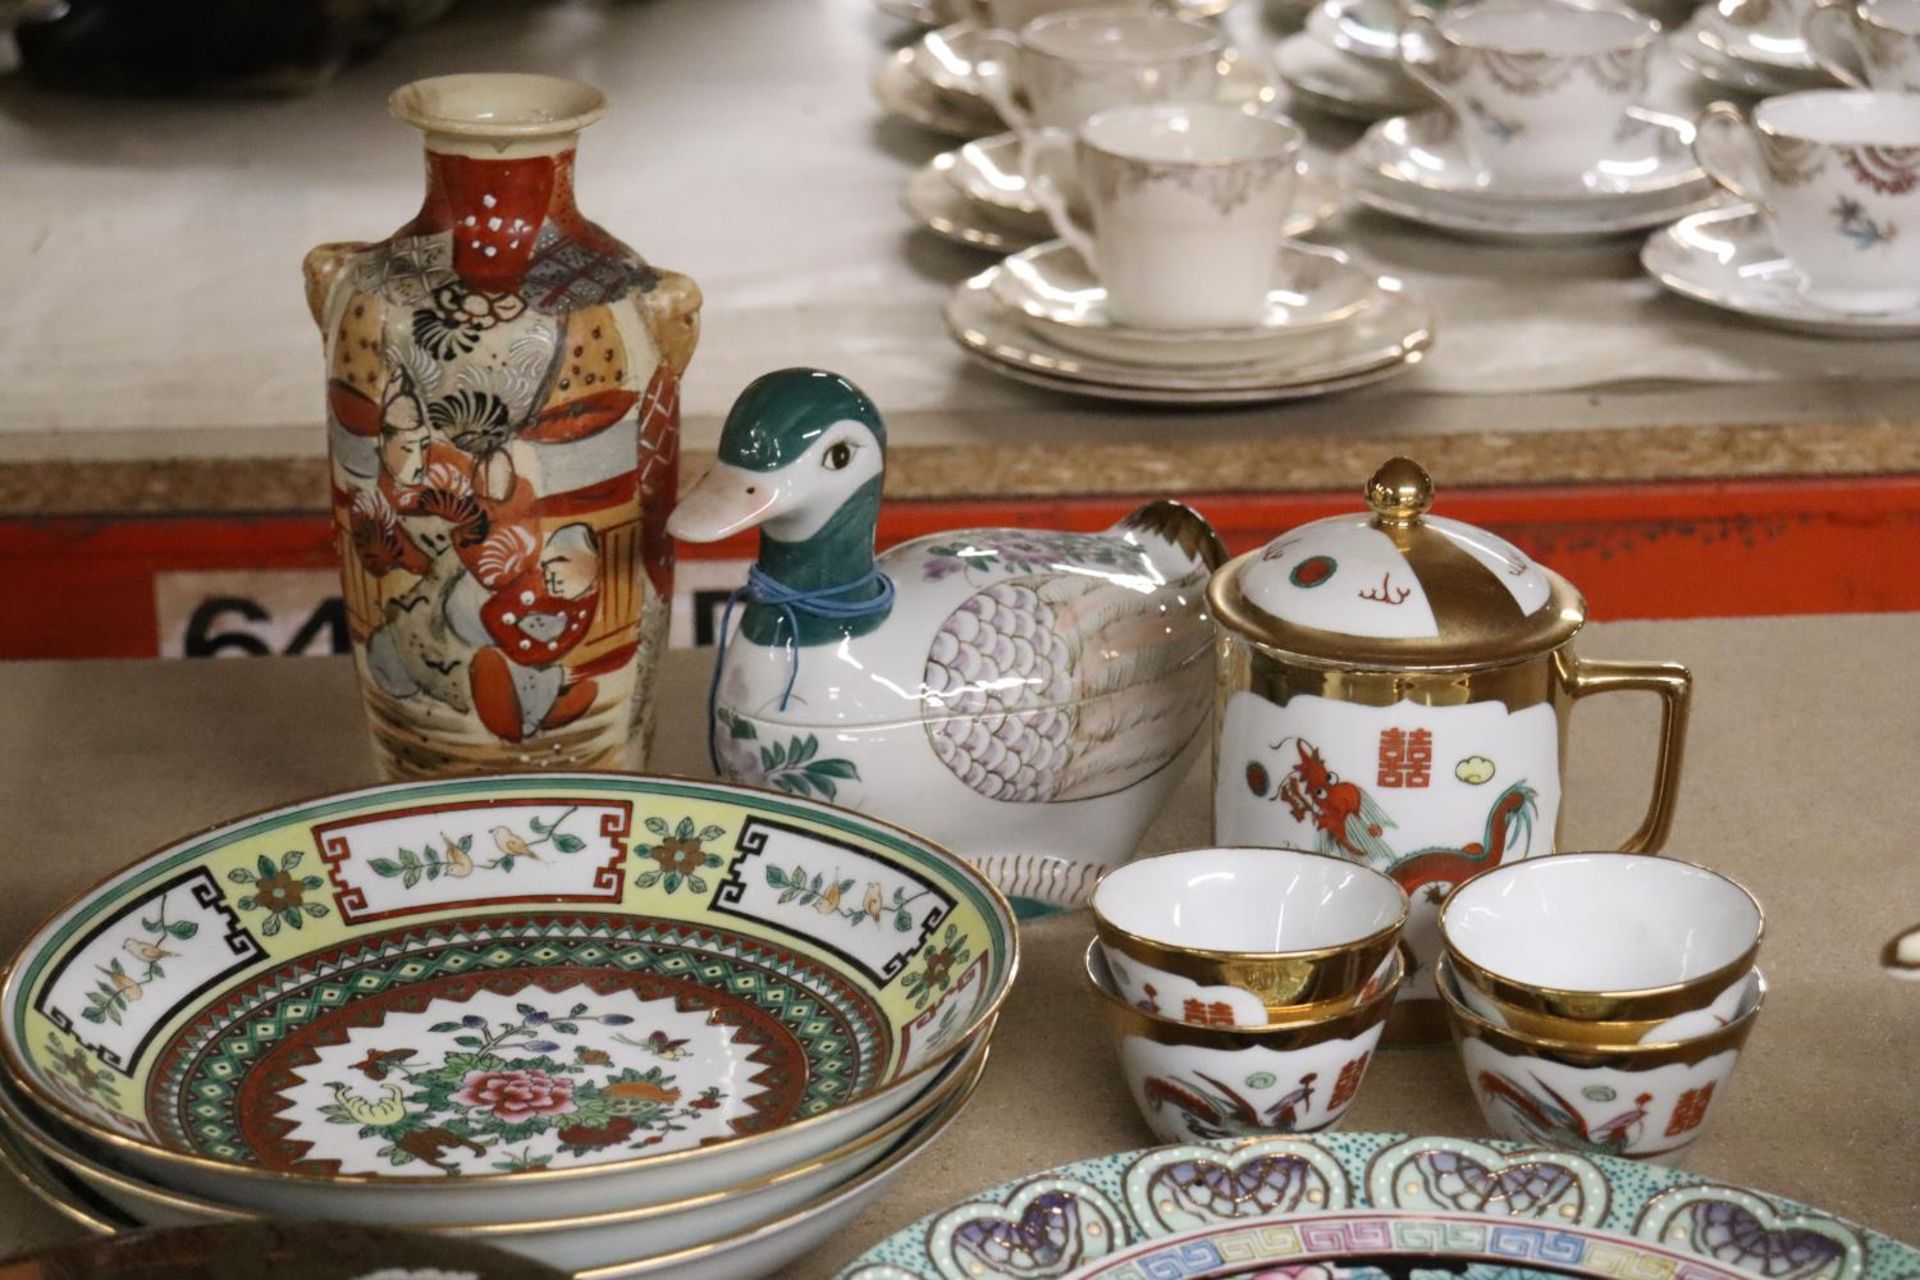 A COLLECTION OF ORIENTAL AND ORIENTAL STYLE ITEMS TO INCLUDE A VASE, PLATES, CUPS, BOWLS, A DUCK, - Image 4 of 5